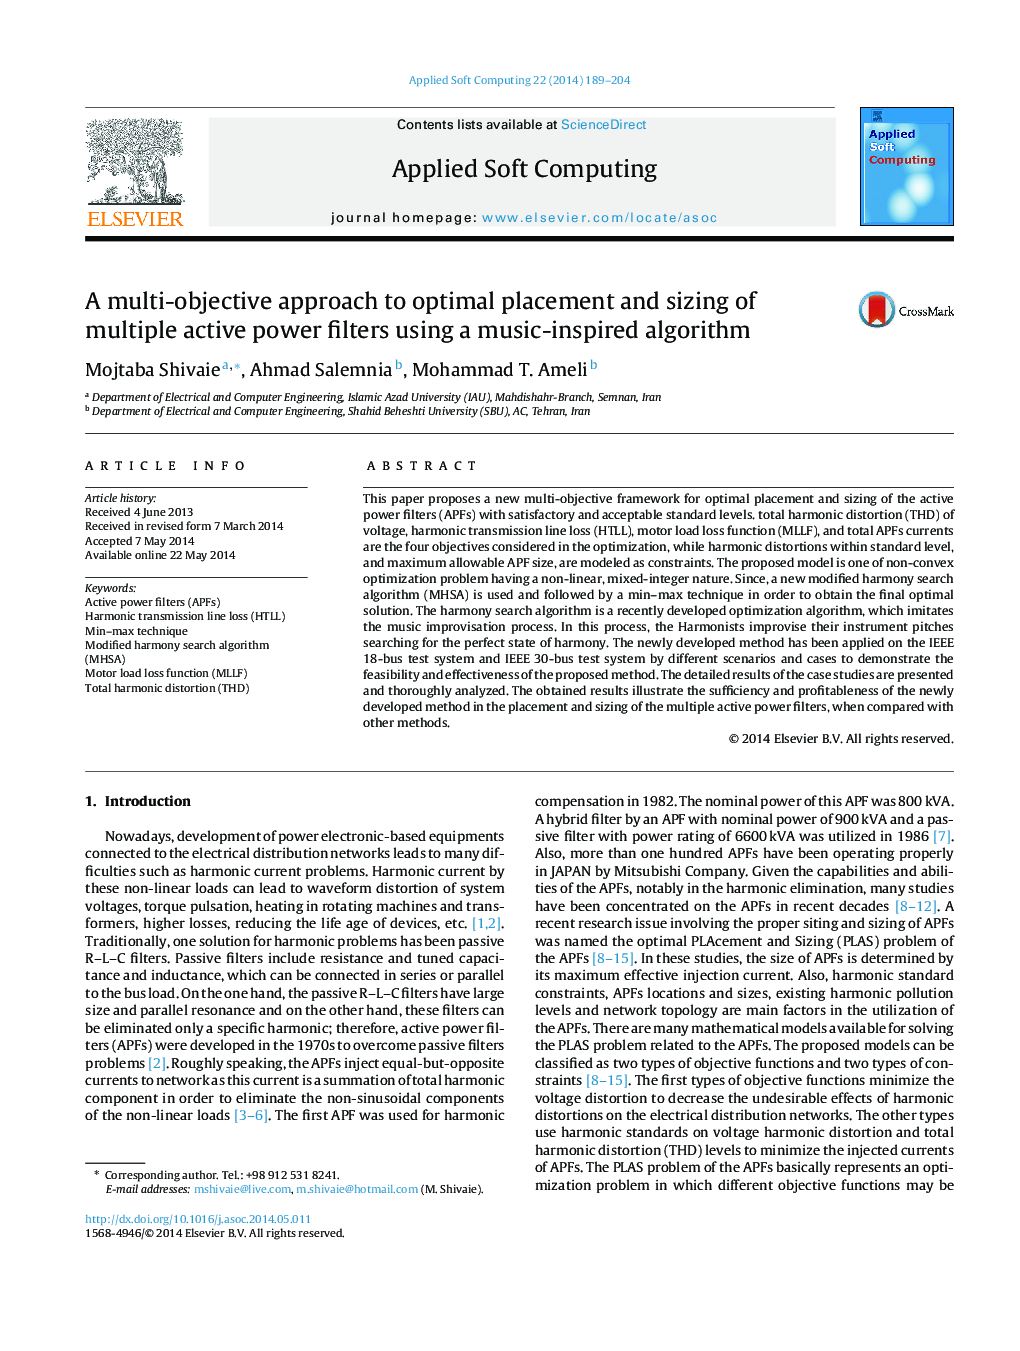 A multi-objective approach to optimal placement and sizing of multiple active power filters using a music-inspired algorithm